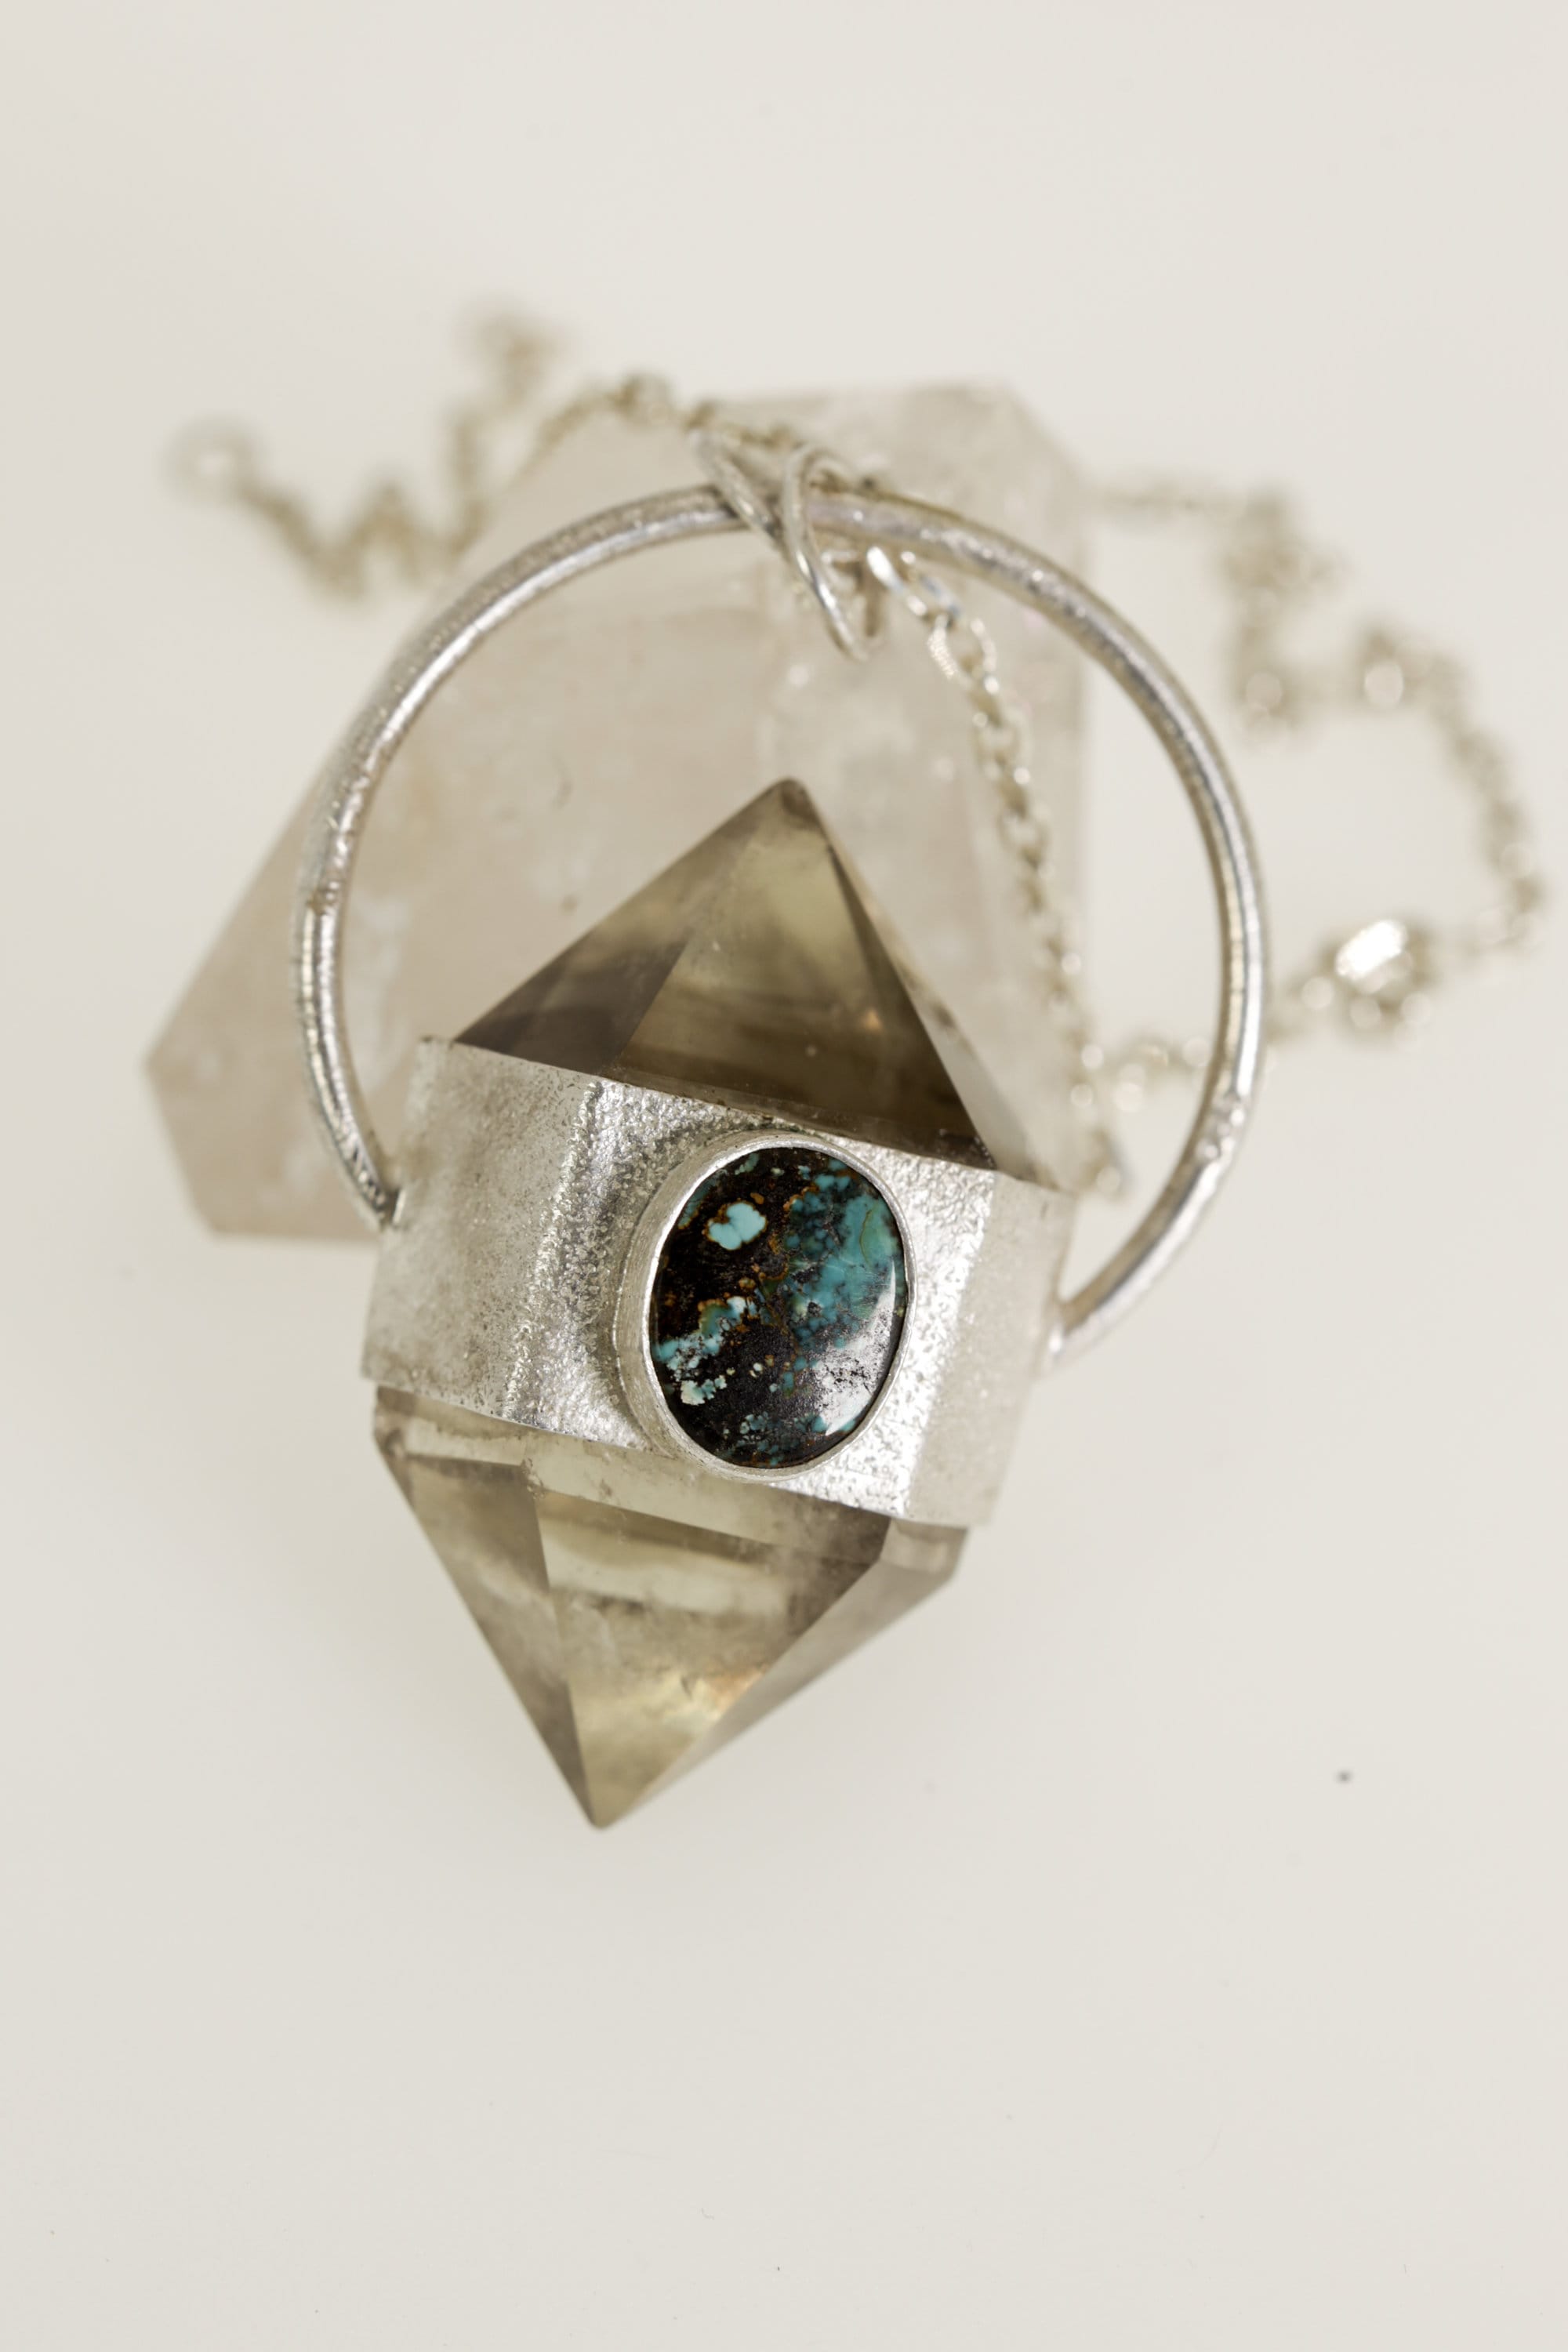 Sterling Silver Wrapped Pendant with Sand-Textured Oval, Cut Double Terminated Citrine Generator Quartz Crystal & Two Oval Tibetan Turquoise